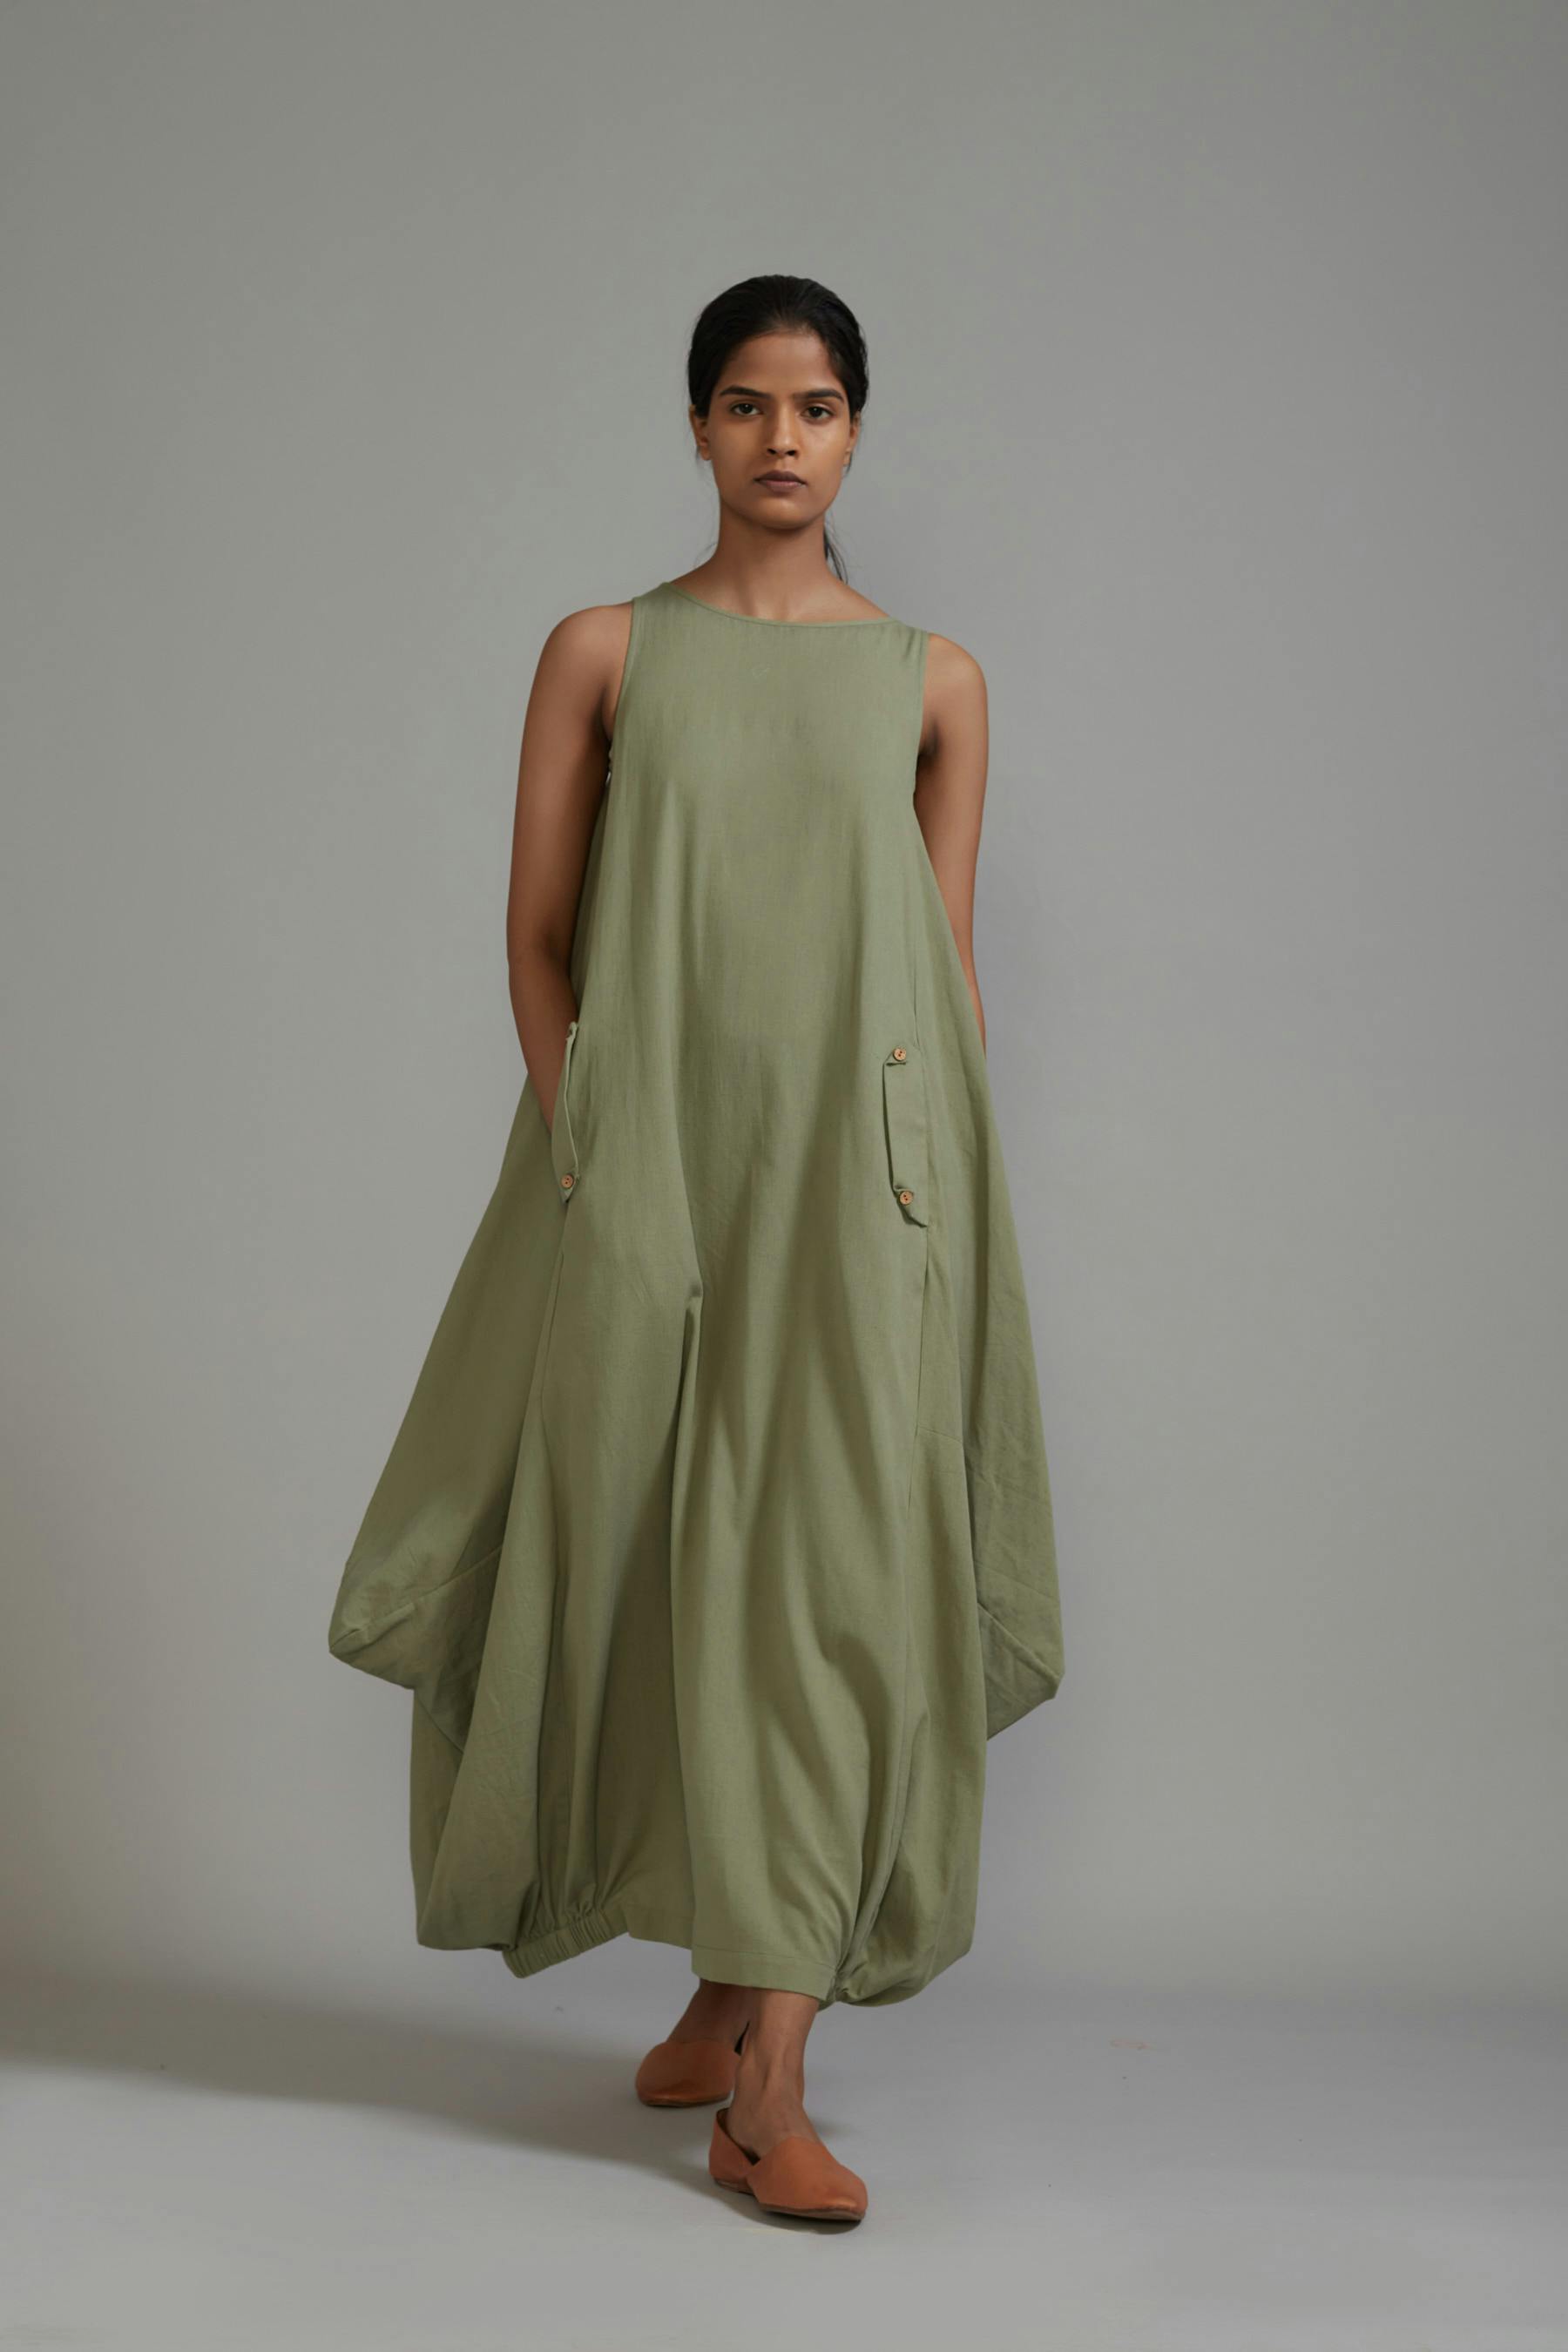 Green New Vari Aakar , a product by Style Mati